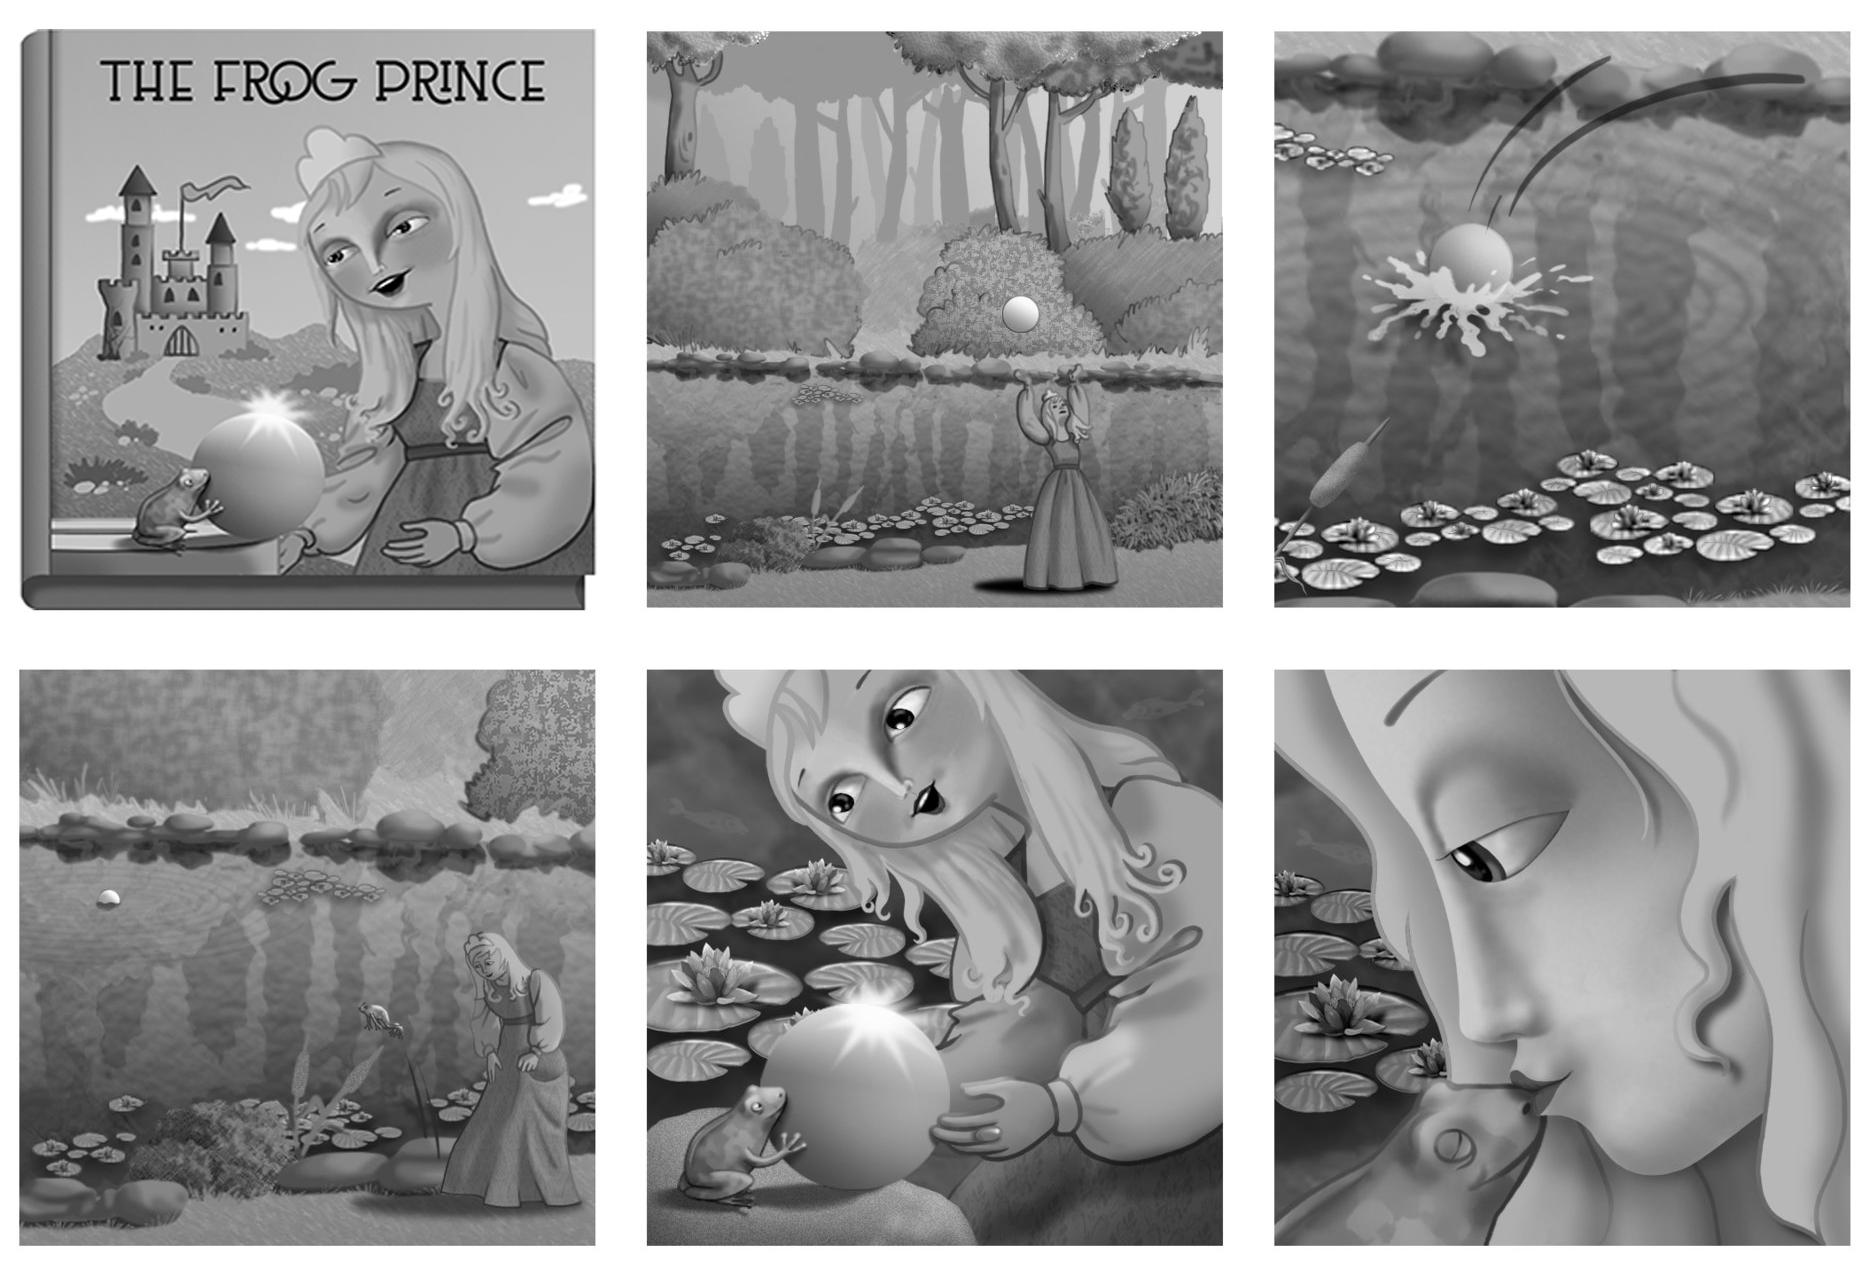 THE FROG PRINCE. Story in grayscale for an educational book. Publisher: Pearson Education.